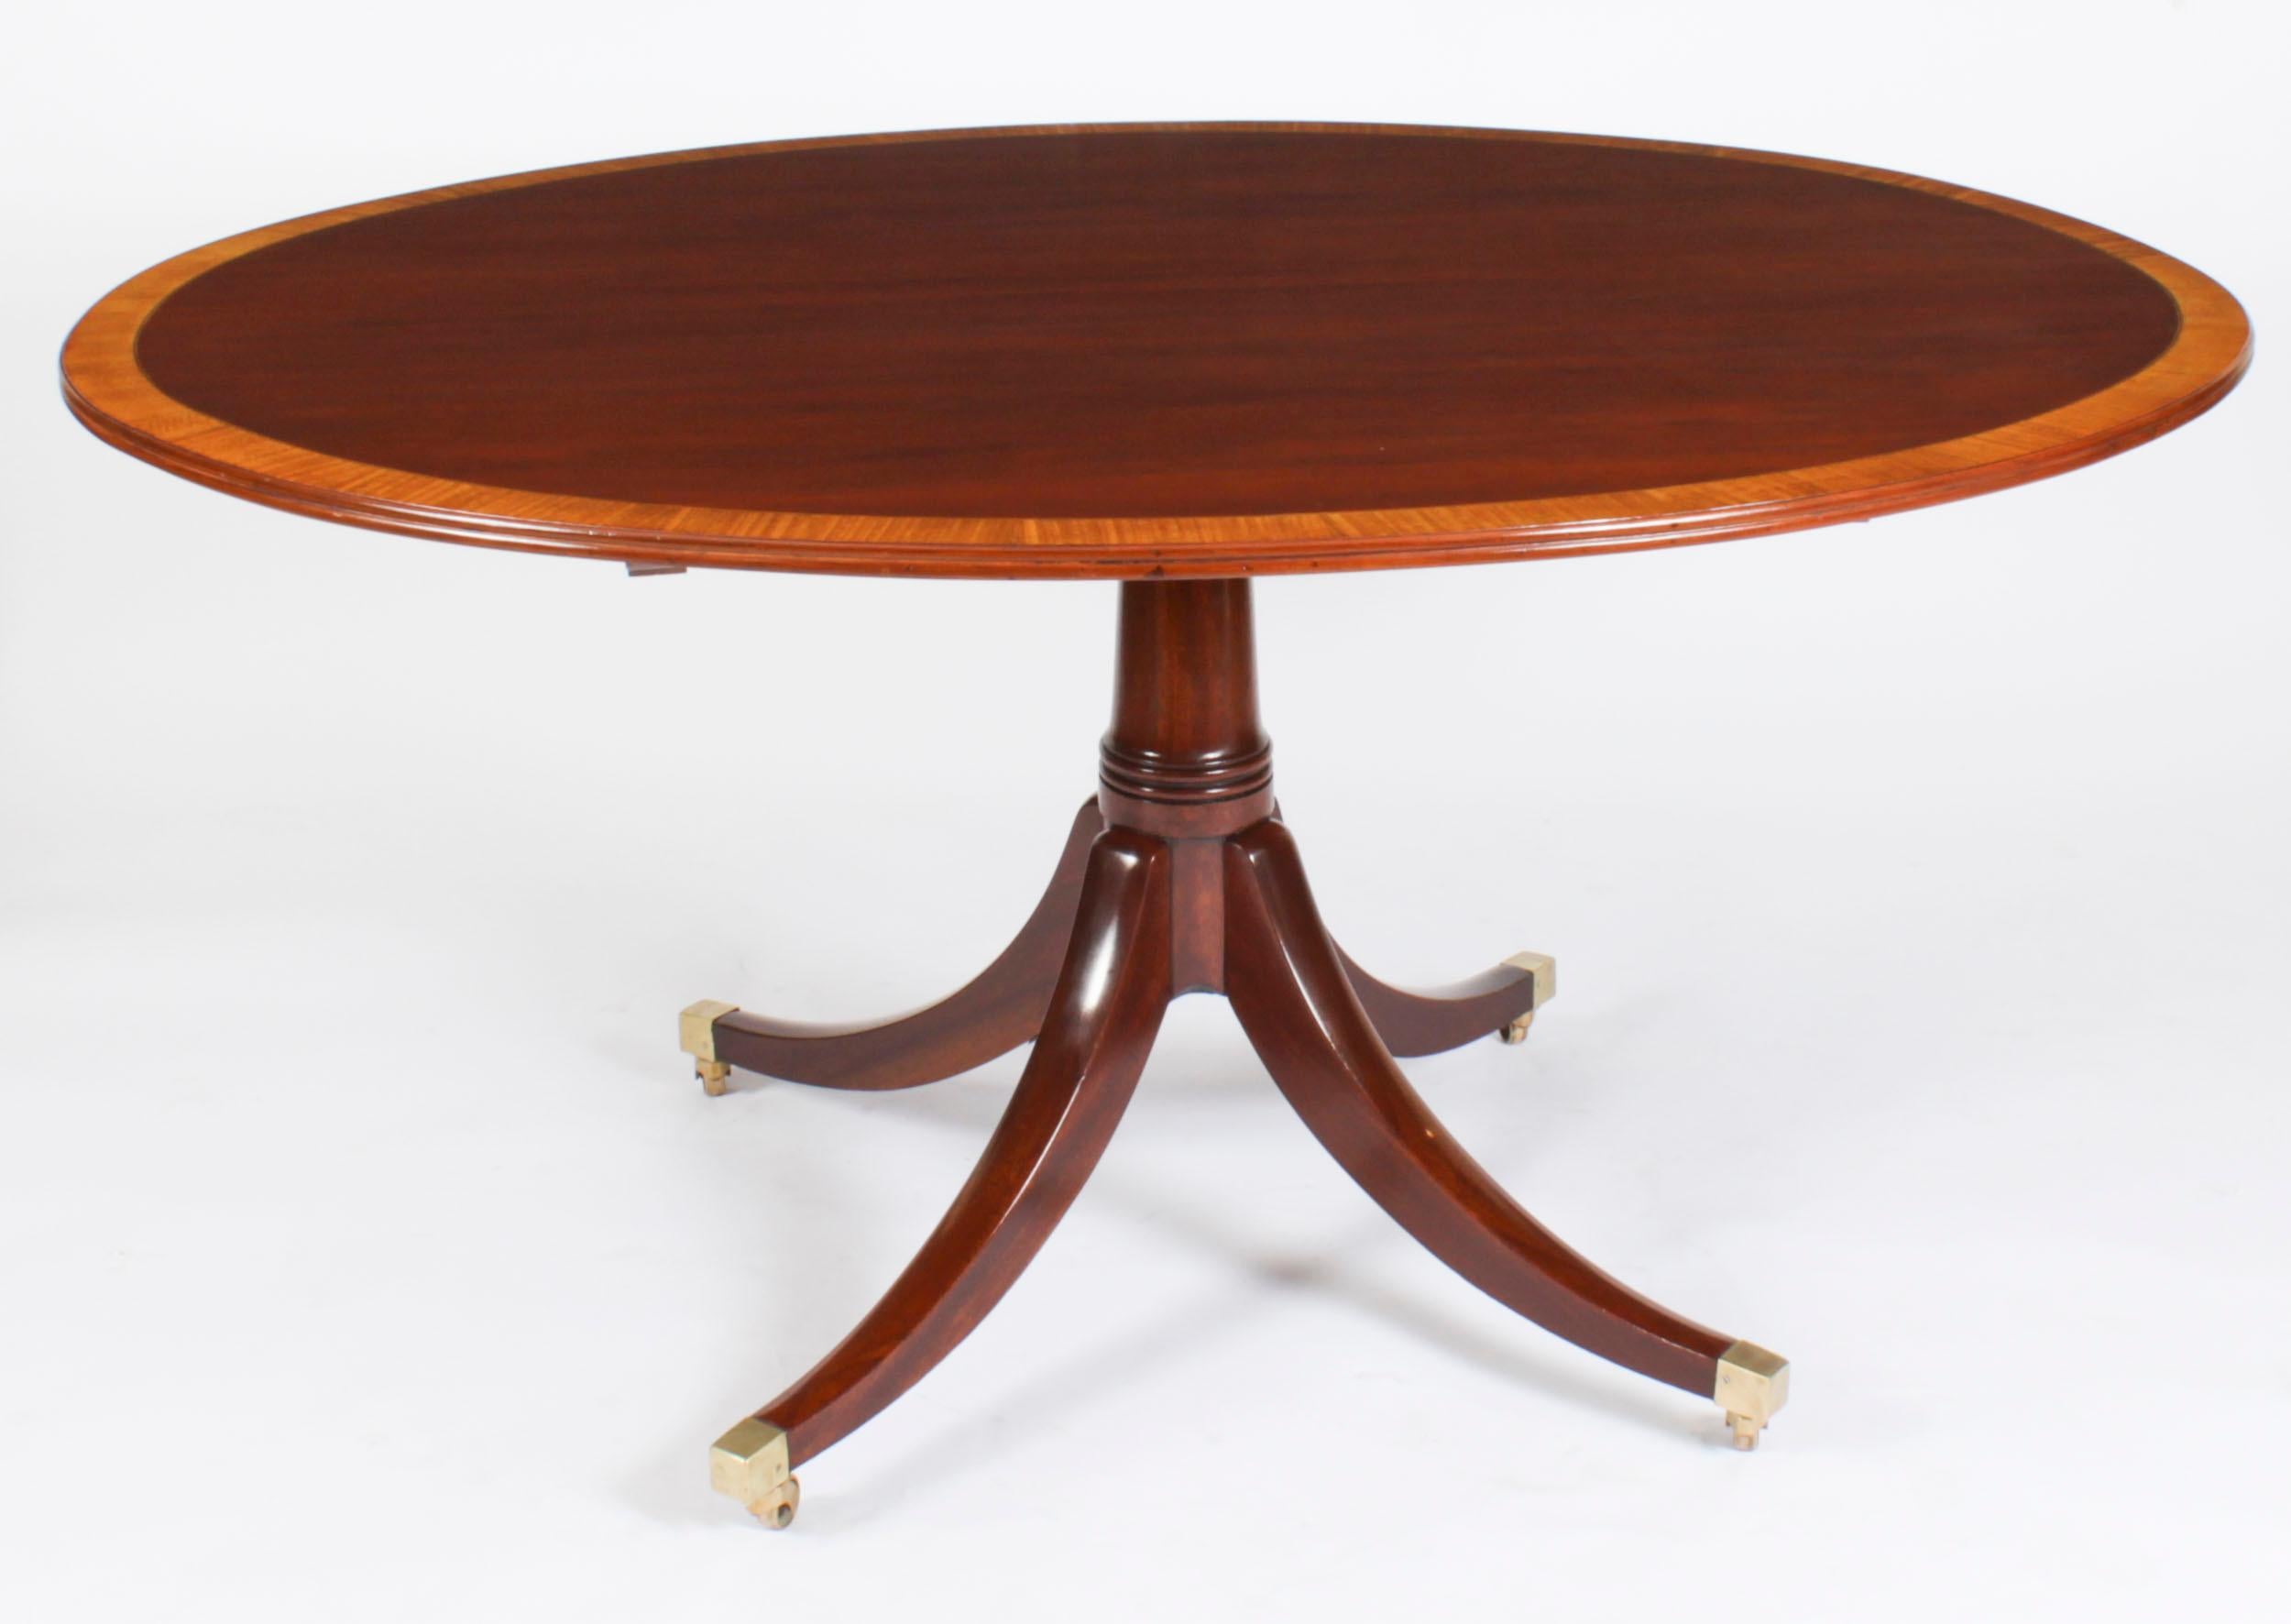 Regency Revival Antique Oval Mahogany Tilt Top Dining Table, Early 20th Century